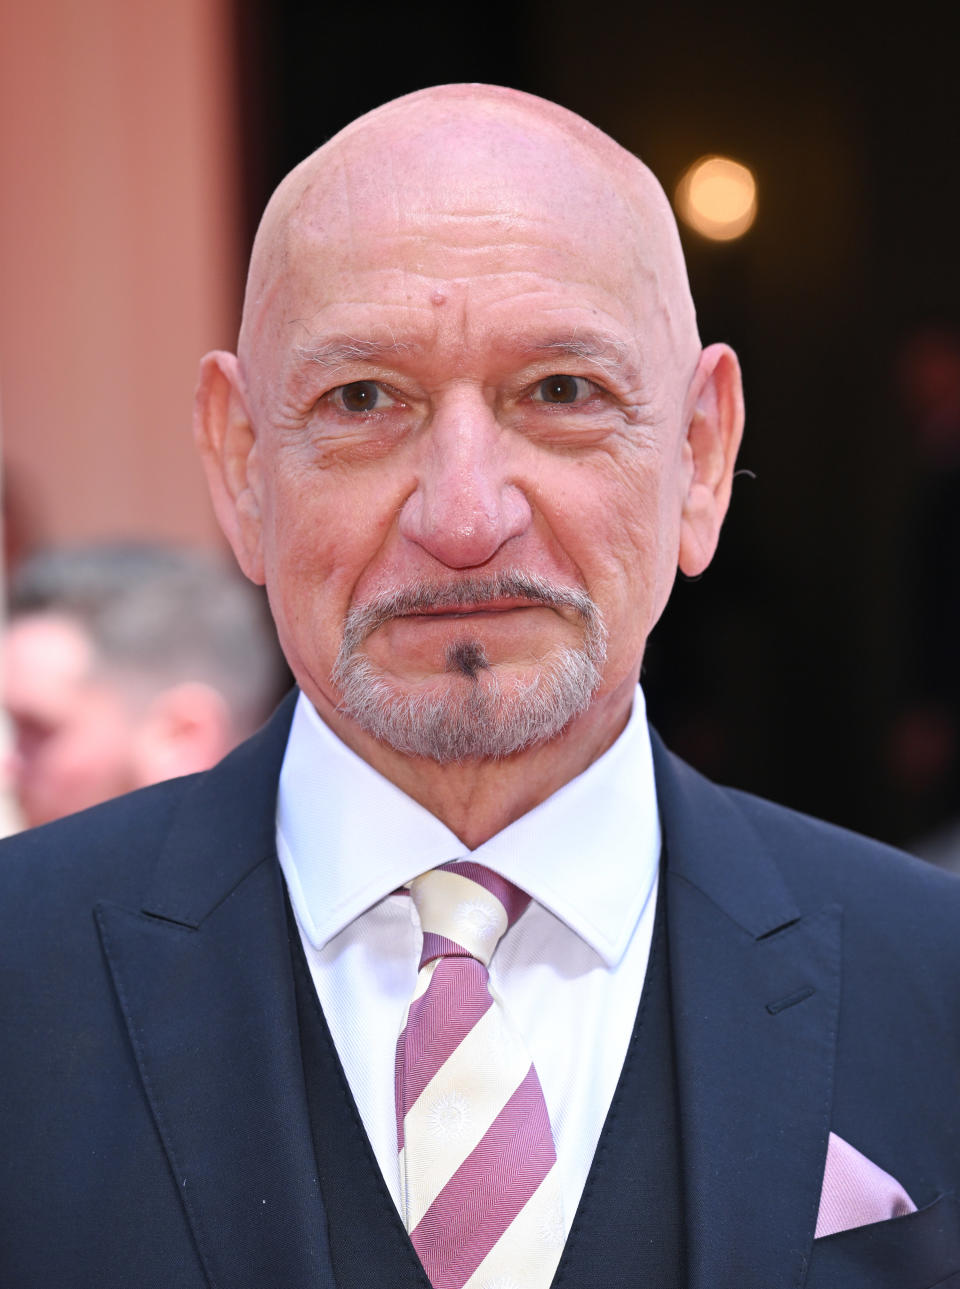 Ben Kingsley attends The Prince's Trust Awards 2022 at Theatre Royal Drury Lane